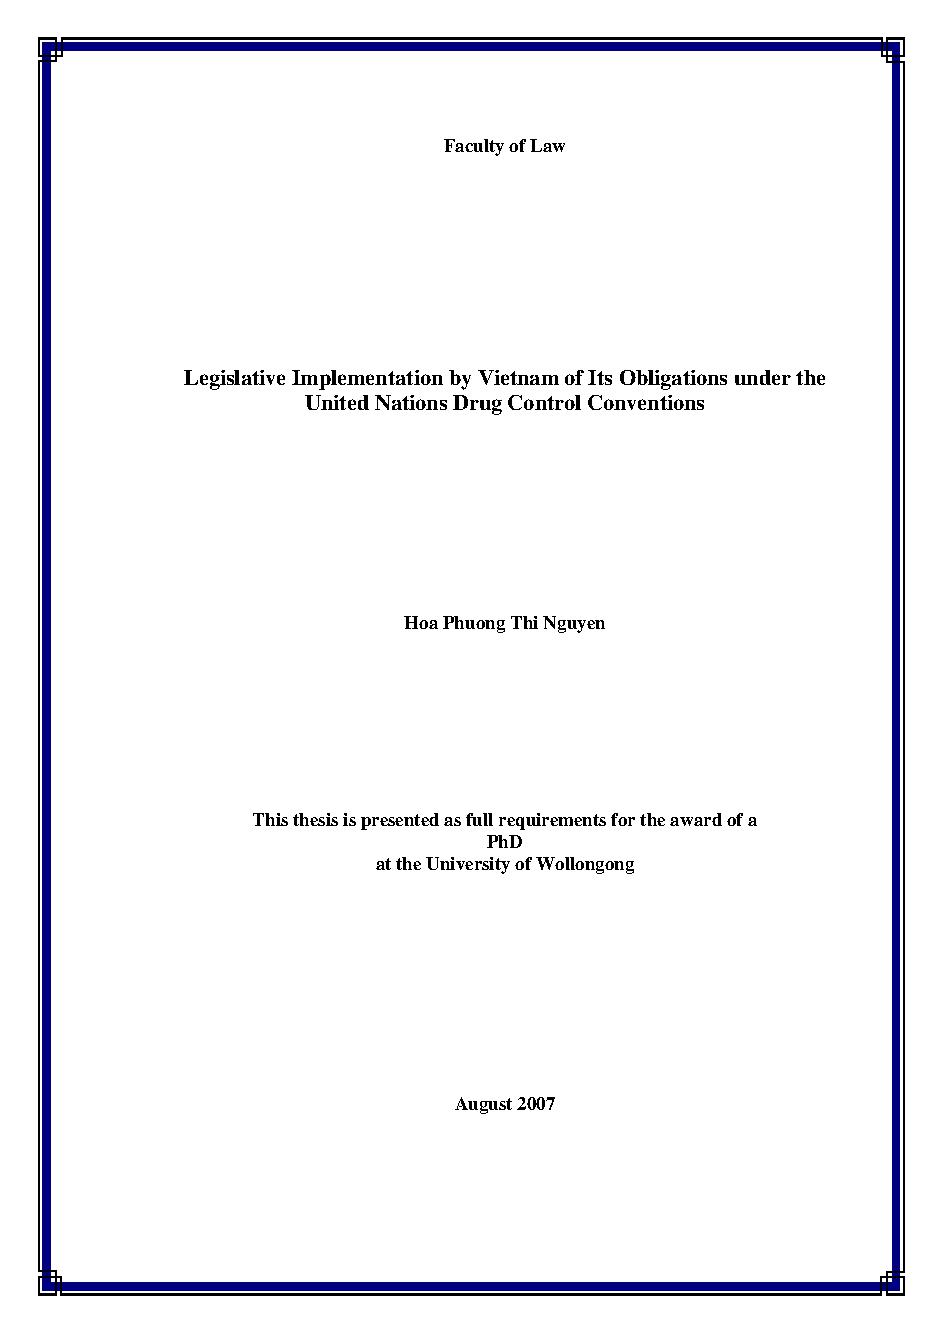 Legislative implementation by VietNam of its obligations under the united nations drug control conventions